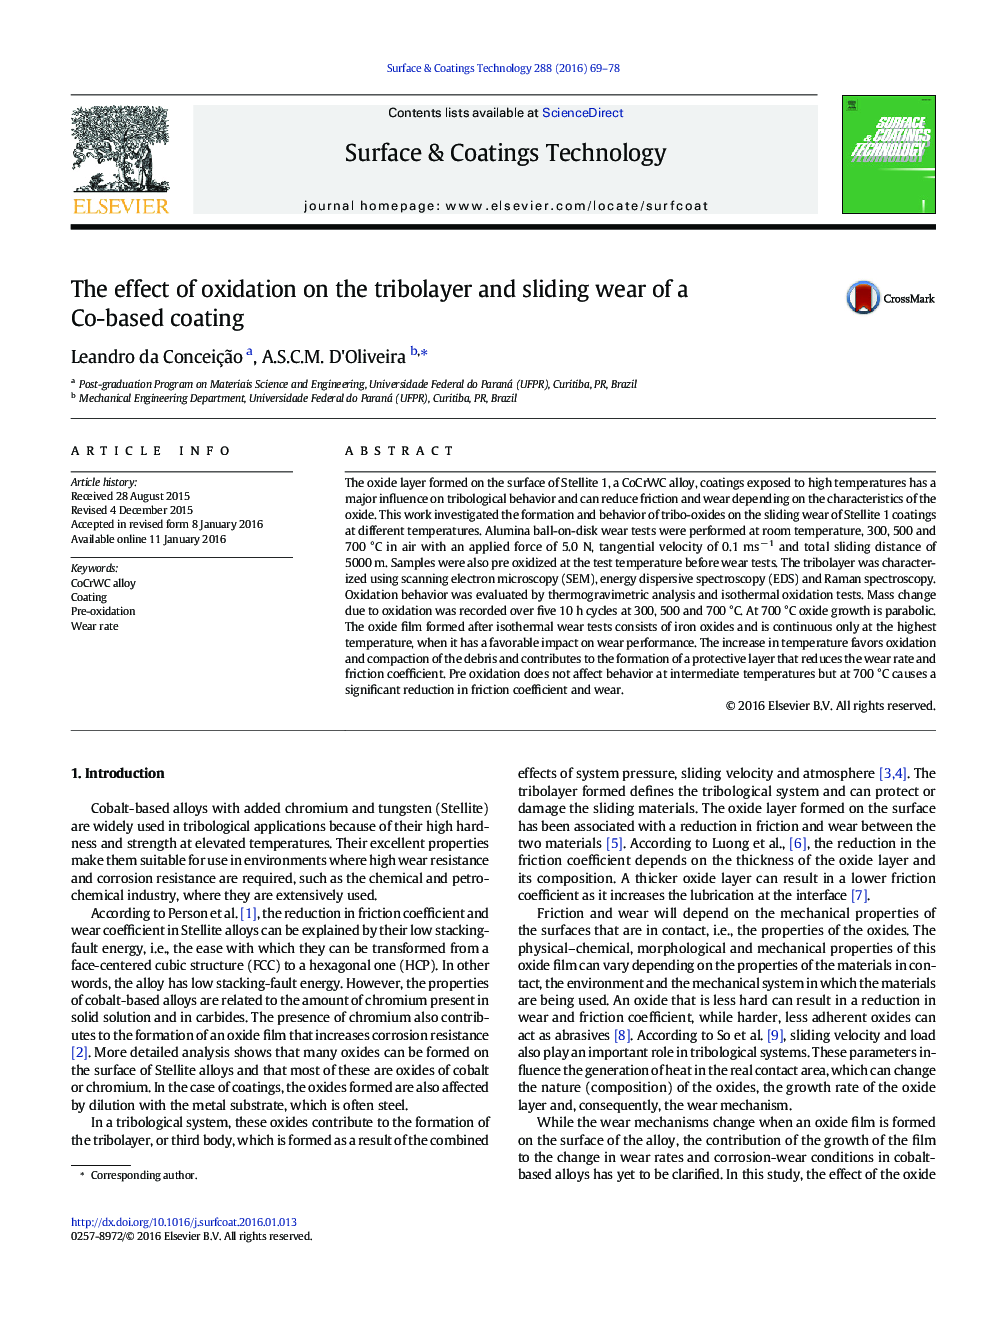 The effect of oxidation on the tribolayer and sliding wear of a Co-based coating